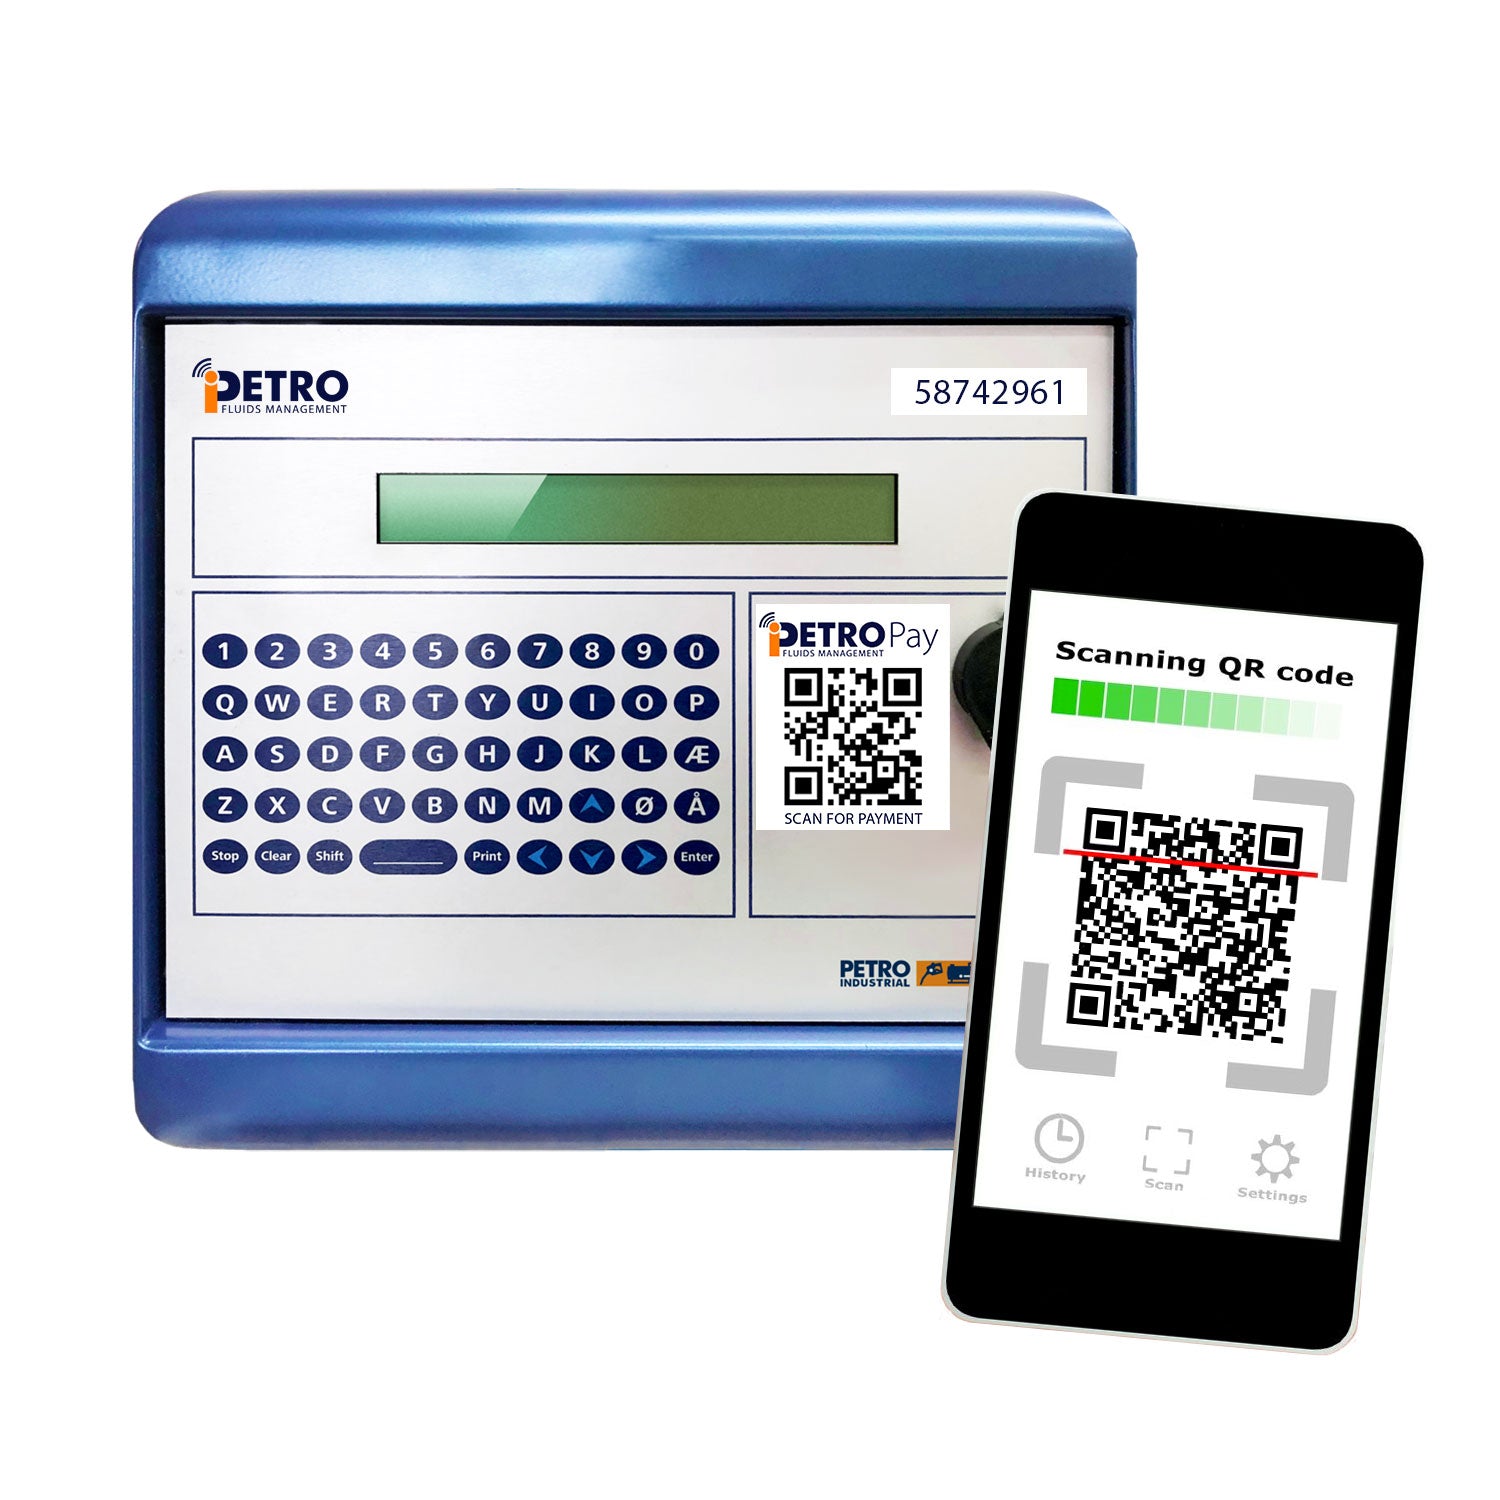 iPETRO Pay FMS (On-site Payment Terminal)